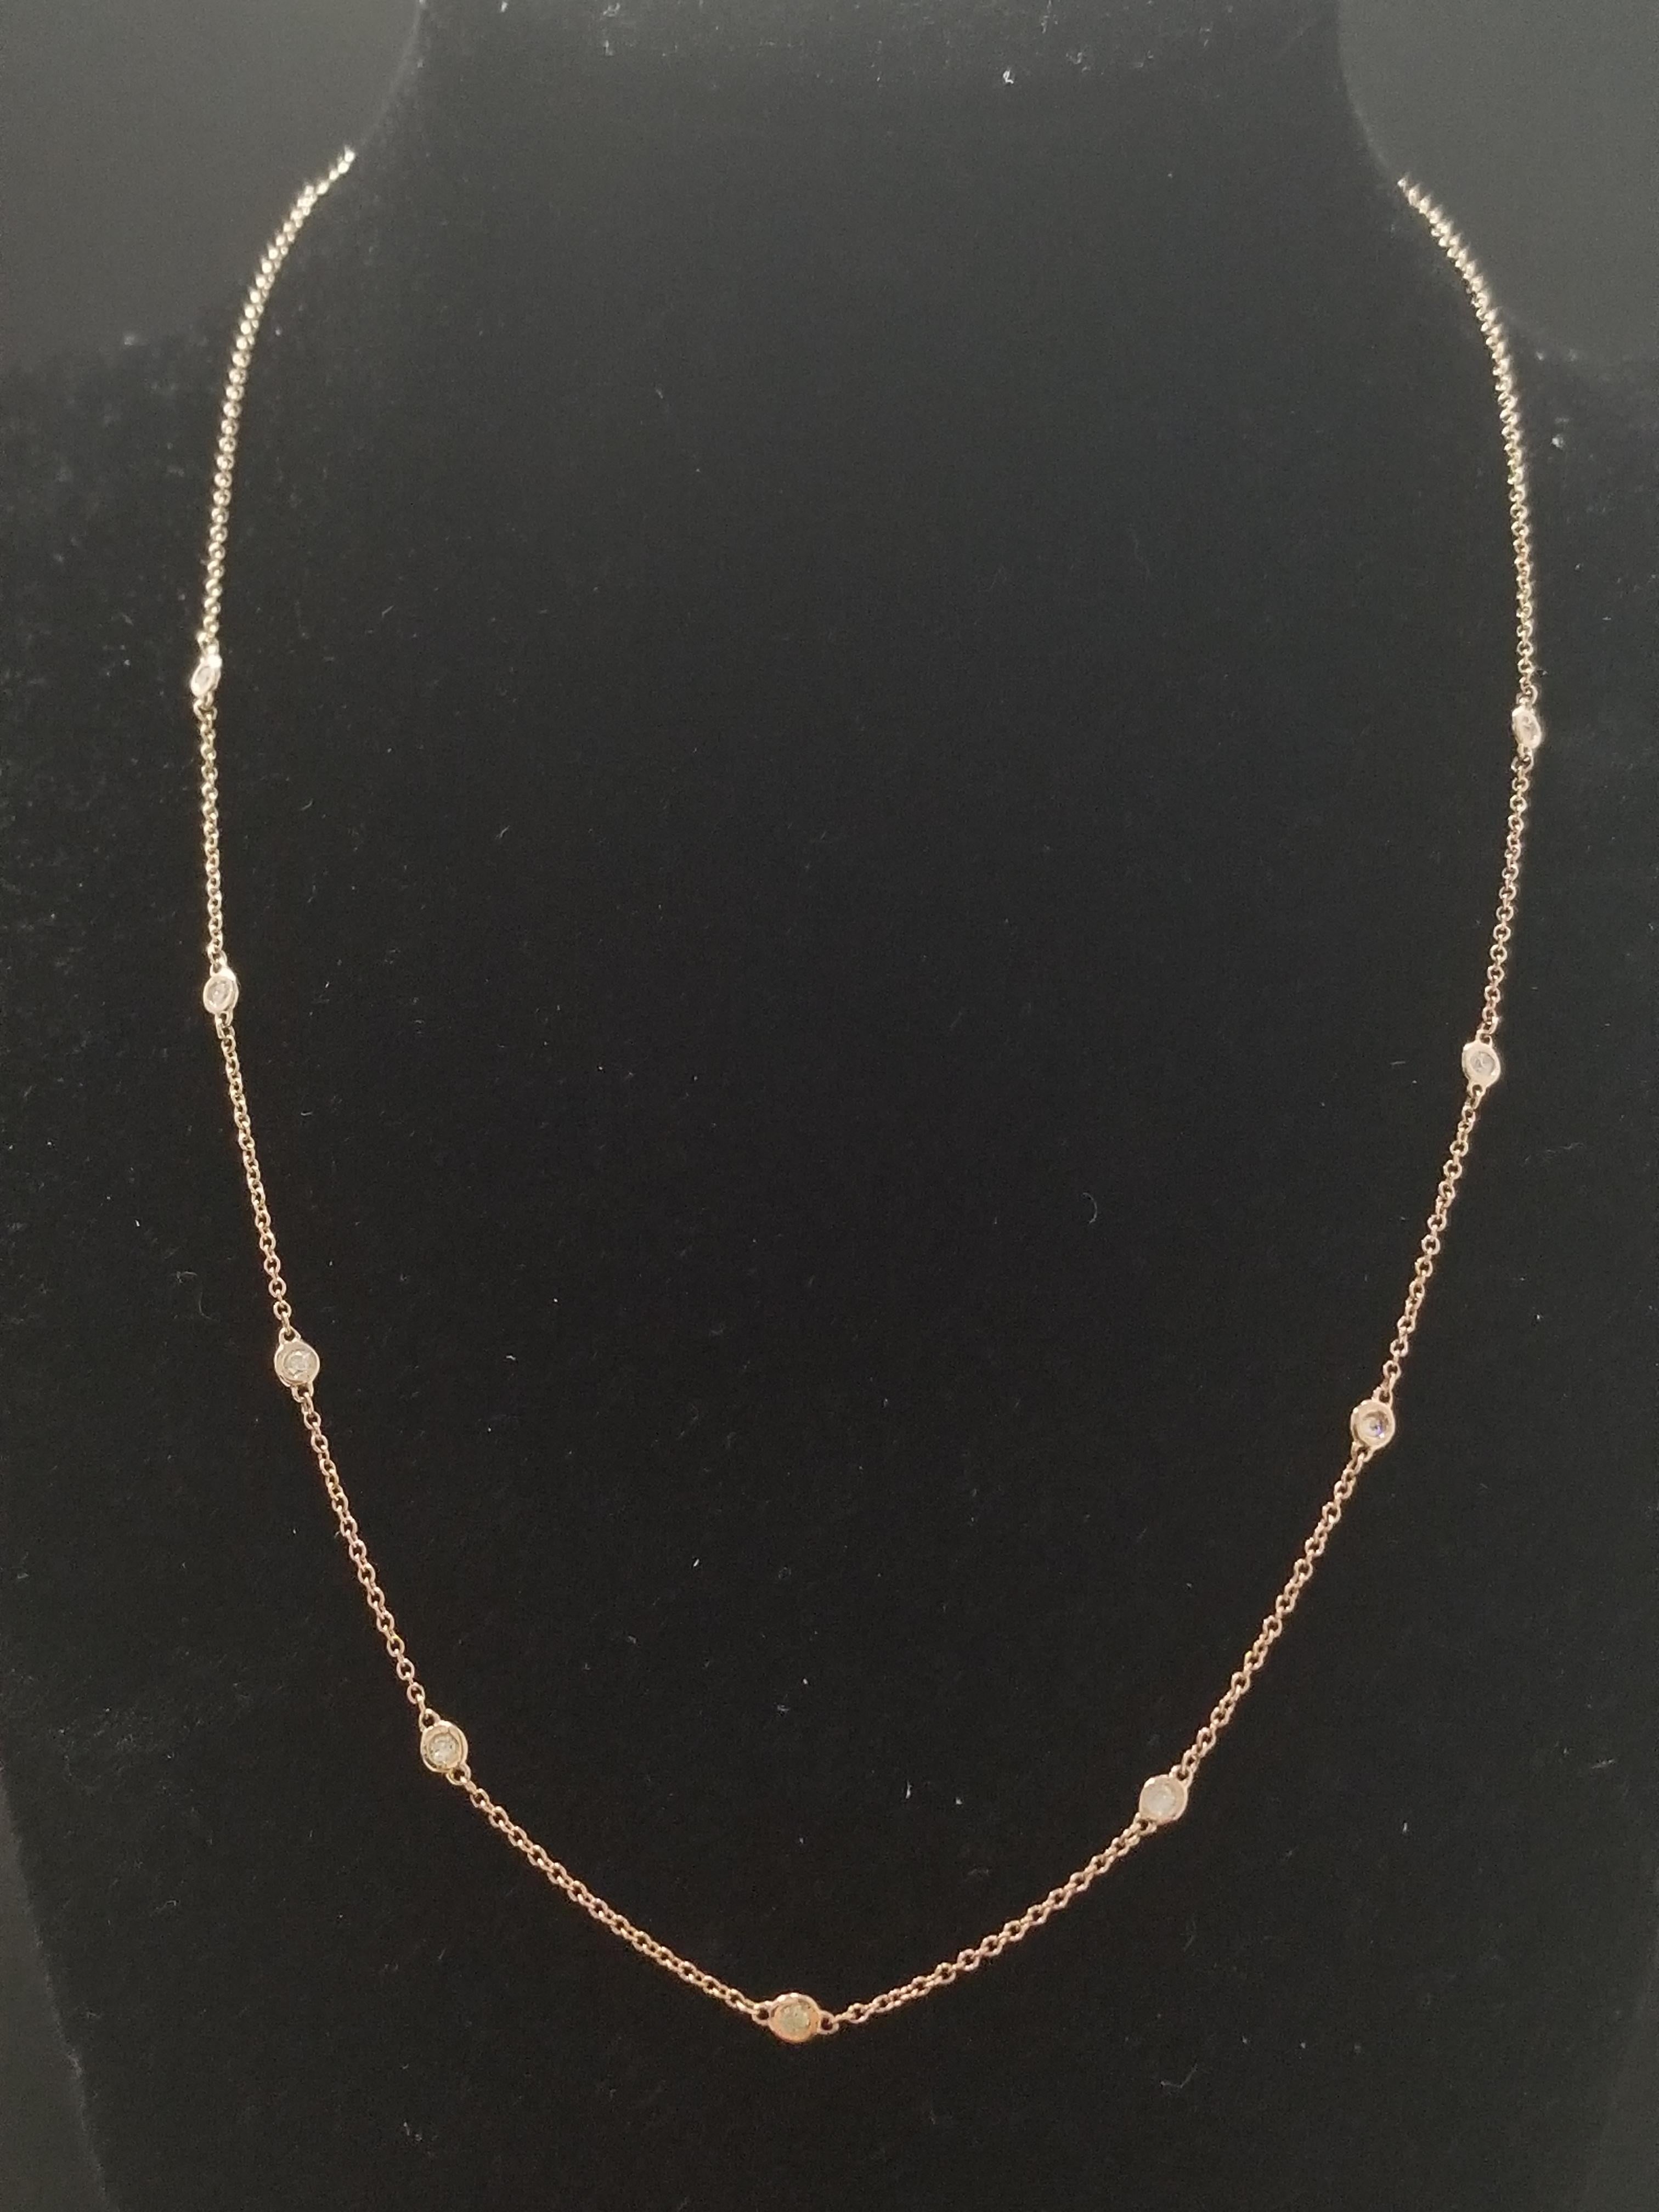 9 STATIONS DIAMOND STATION NECKLACE BEZEL-SET IN 14K ROSE GOLD (0.45 CTW)

PRODUCT DETAILS

(Handcrafted With Natural Diamonds)

Eleven brilliant cut round diamonds sparkle in a bezel setting in this stunning Diamonds chain necklace 0.45 cttw. The